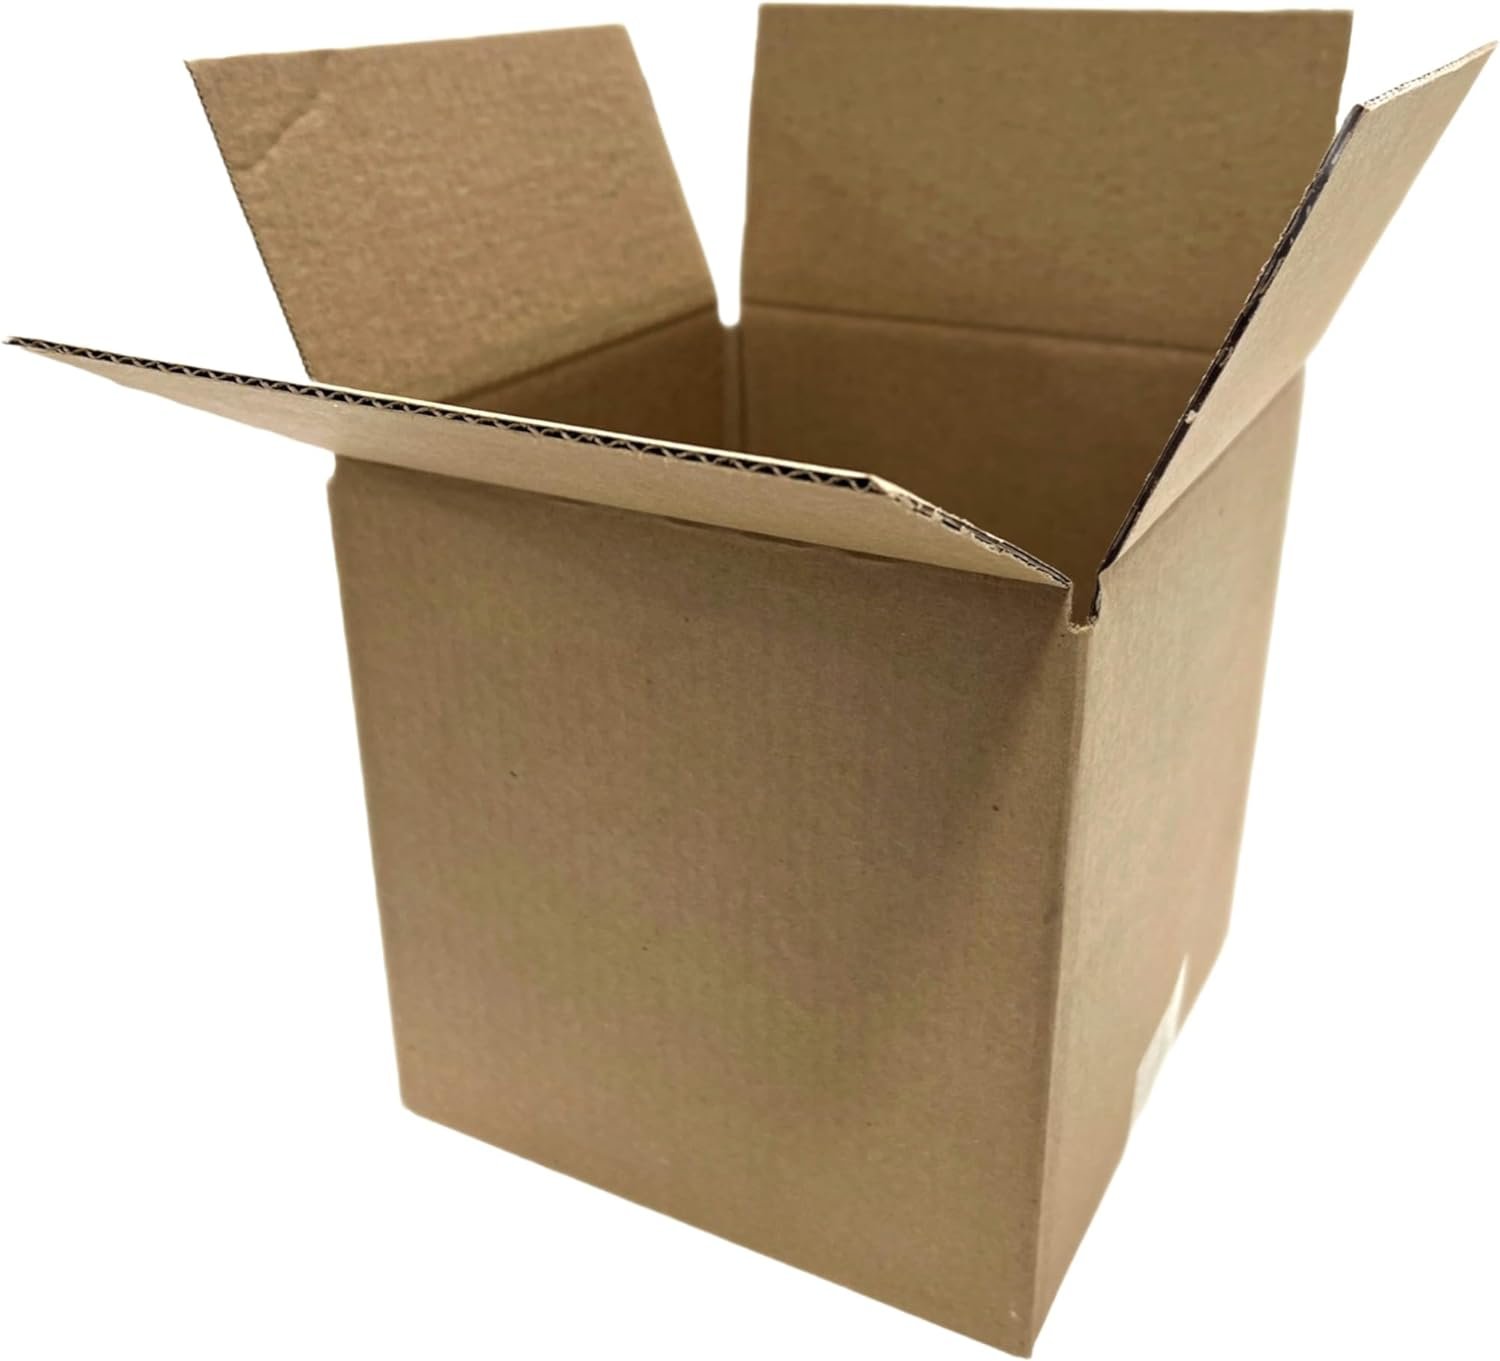 25 6x6x5 Cardboard Paper Boxes Mailing Packing Shipping Box Corrugated Carton